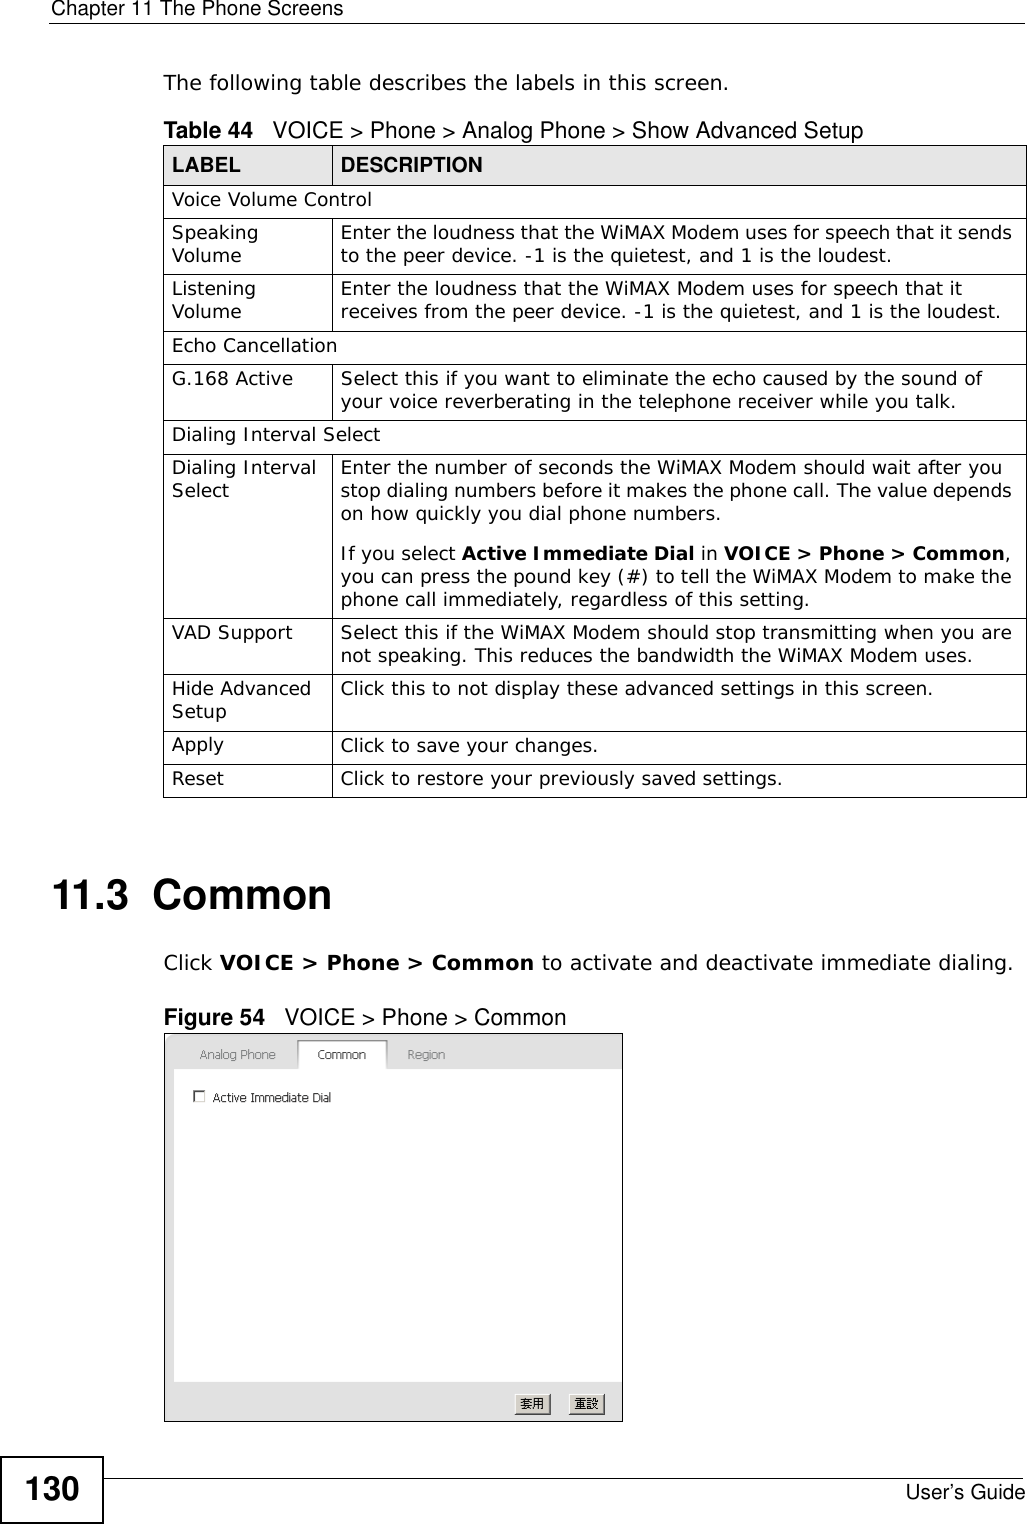 Chapter 11 The Phone ScreensUser’s Guide130The following table describes the labels in this screen.11.3  CommonClick VOICE &gt; Phone &gt; Common to activate and deactivate immediate dialing.Figure 54   VOICE &gt; Phone &gt; CommonTable 44   VOICE &gt; Phone &gt; Analog Phone &gt; Show Advanced SetupLABEL DESCRIPTIONVoice Volume ControlSpeaking Volume Enter the loudness that the WiMAX Modem uses for speech that it sends to the peer device. -1 is the quietest, and 1 is the loudest.Listening Volume Enter the loudness that the WiMAX Modem uses for speech that it receives from the peer device. -1 is the quietest, and 1 is the loudest.Echo CancellationG.168 Active Select this if you want to eliminate the echo caused by the sound of your voice reverberating in the telephone receiver while you talk.Dialing Interval SelectDialing Interval Select Enter the number of seconds the WiMAX Modem should wait after you stop dialing numbers before it makes the phone call. The value depends on how quickly you dial phone numbers.If you select Active Immediate Dial in VOICE &gt; Phone &gt; Common, you can press the pound key (#) to tell the WiMAX Modem to make the phone call immediately, regardless of this setting.VAD Support Select this if the WiMAX Modem should stop transmitting when you are not speaking. This reduces the bandwidth the WiMAX Modem uses.Hide Advanced Setup Click this to not display these advanced settings in this screen.Apply Click to save your changes.Reset Click to restore your previously saved settings.